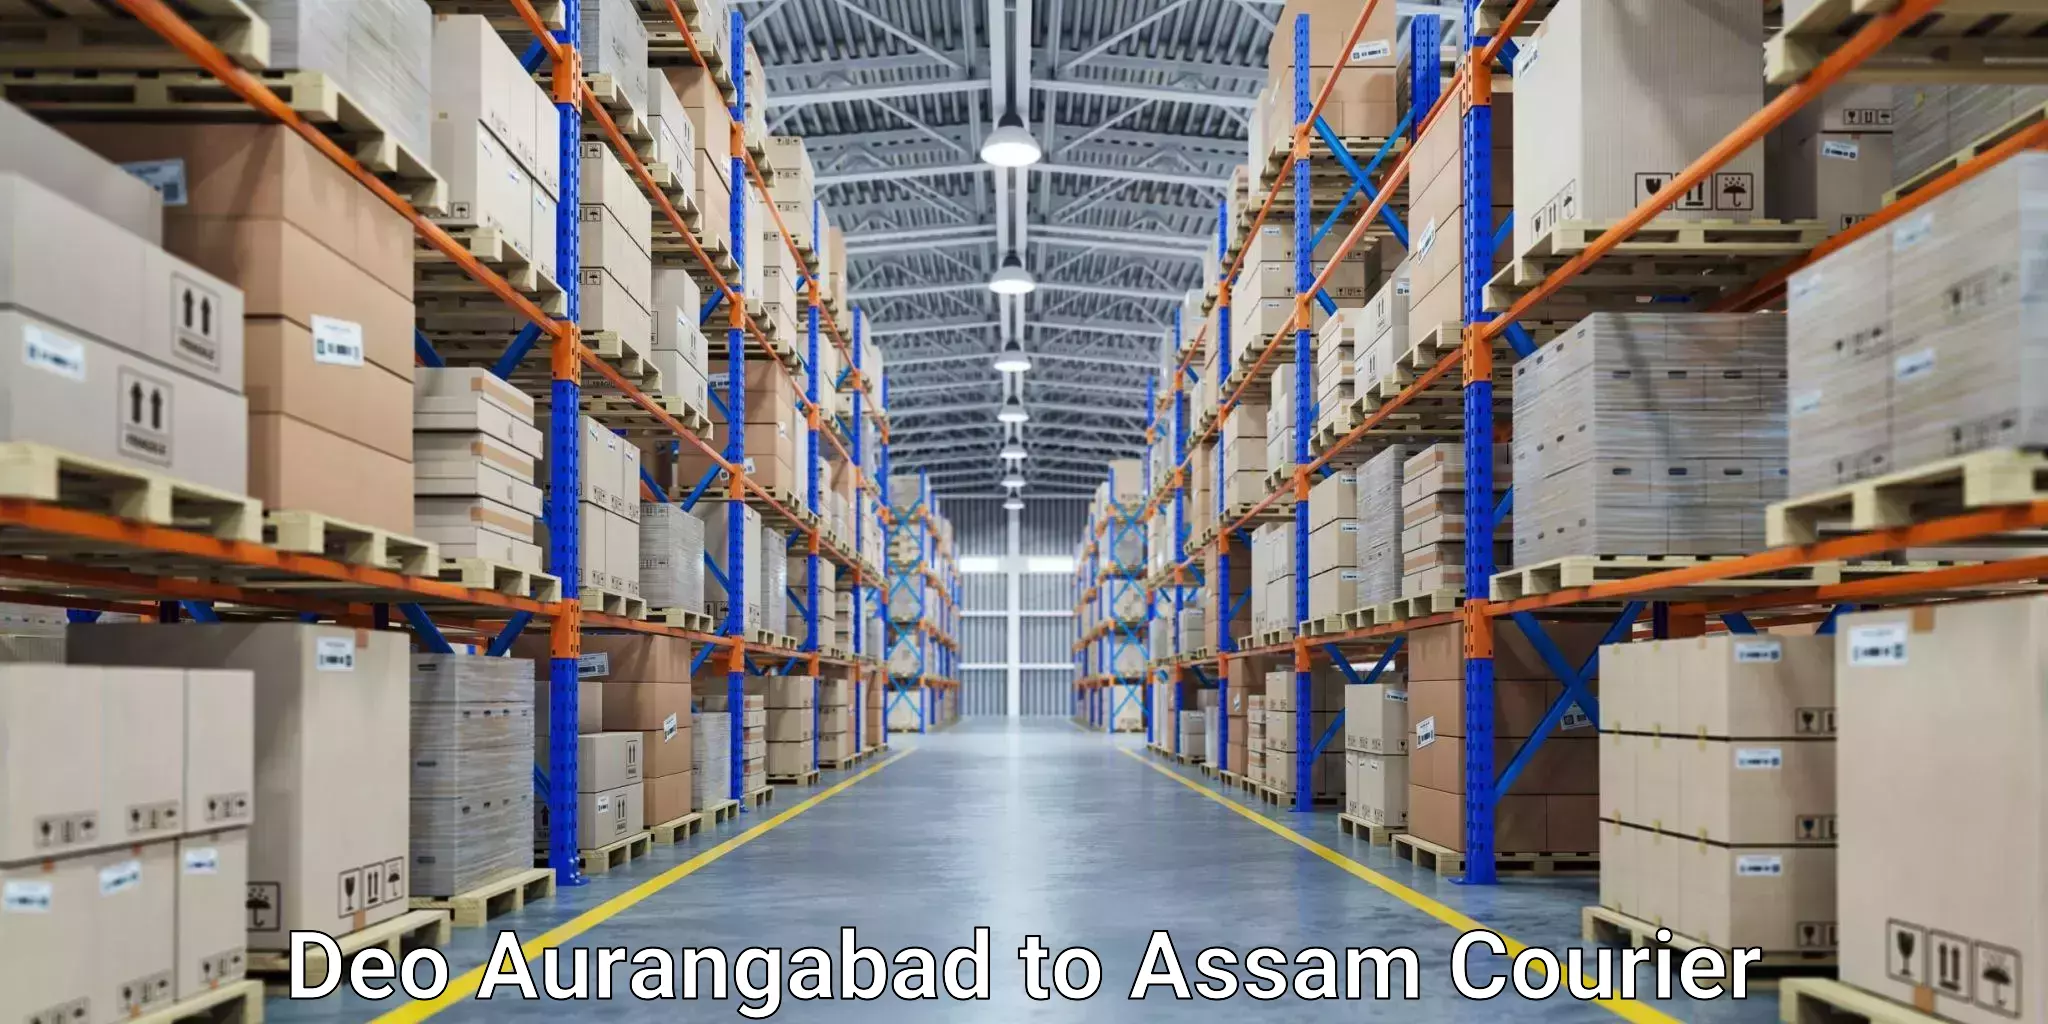 Online package tracking Deo Aurangabad to Jagiroad